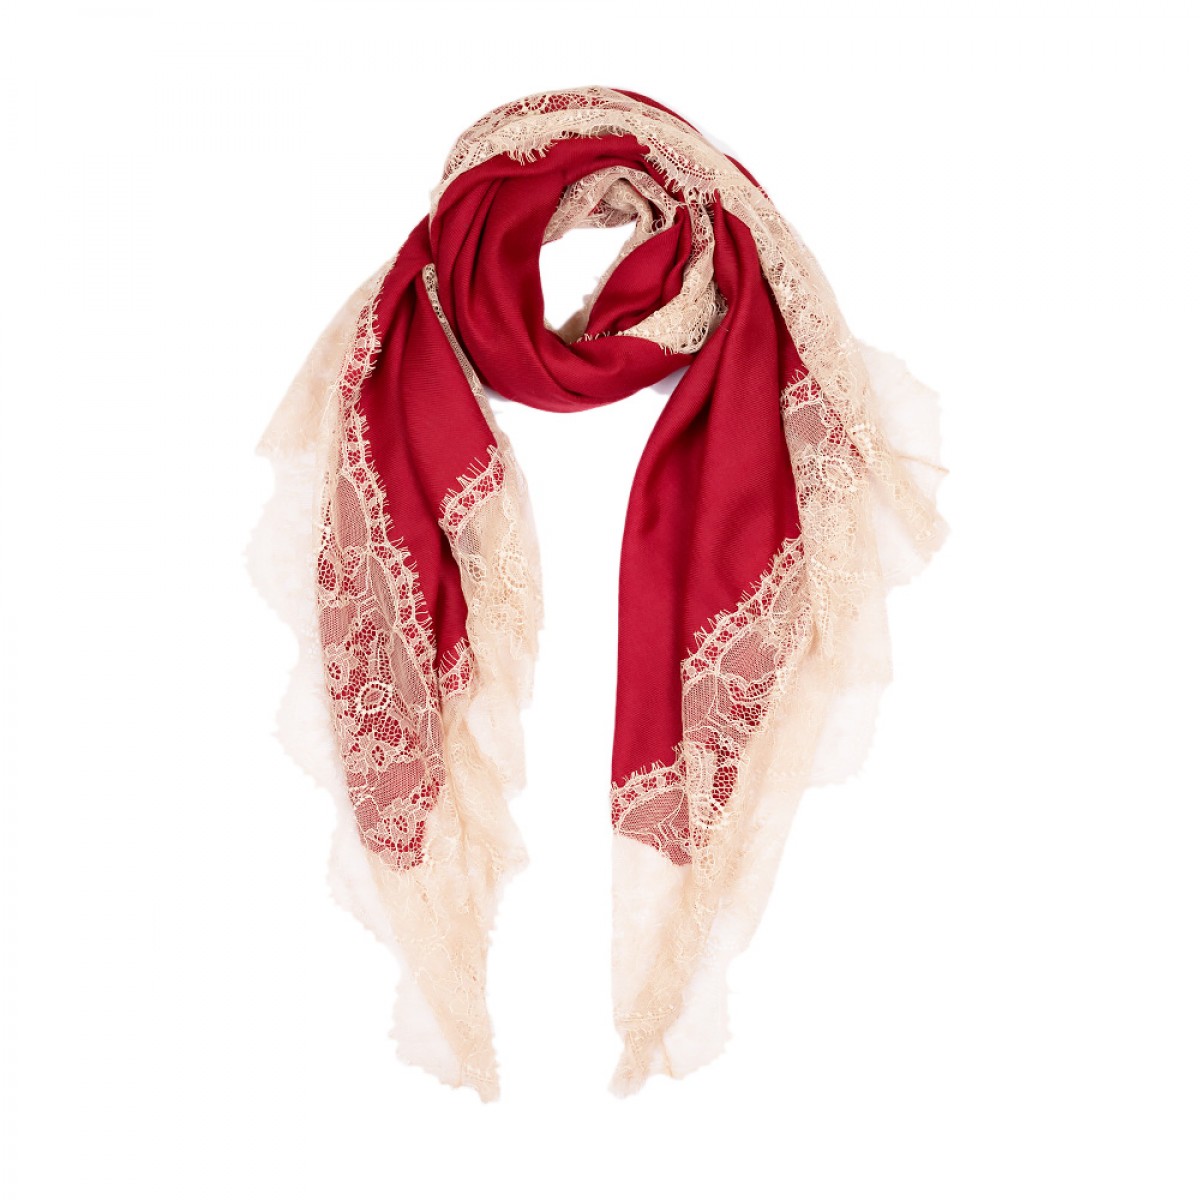  Lace Twill Pashmina Scarf All Over - Crimson Red